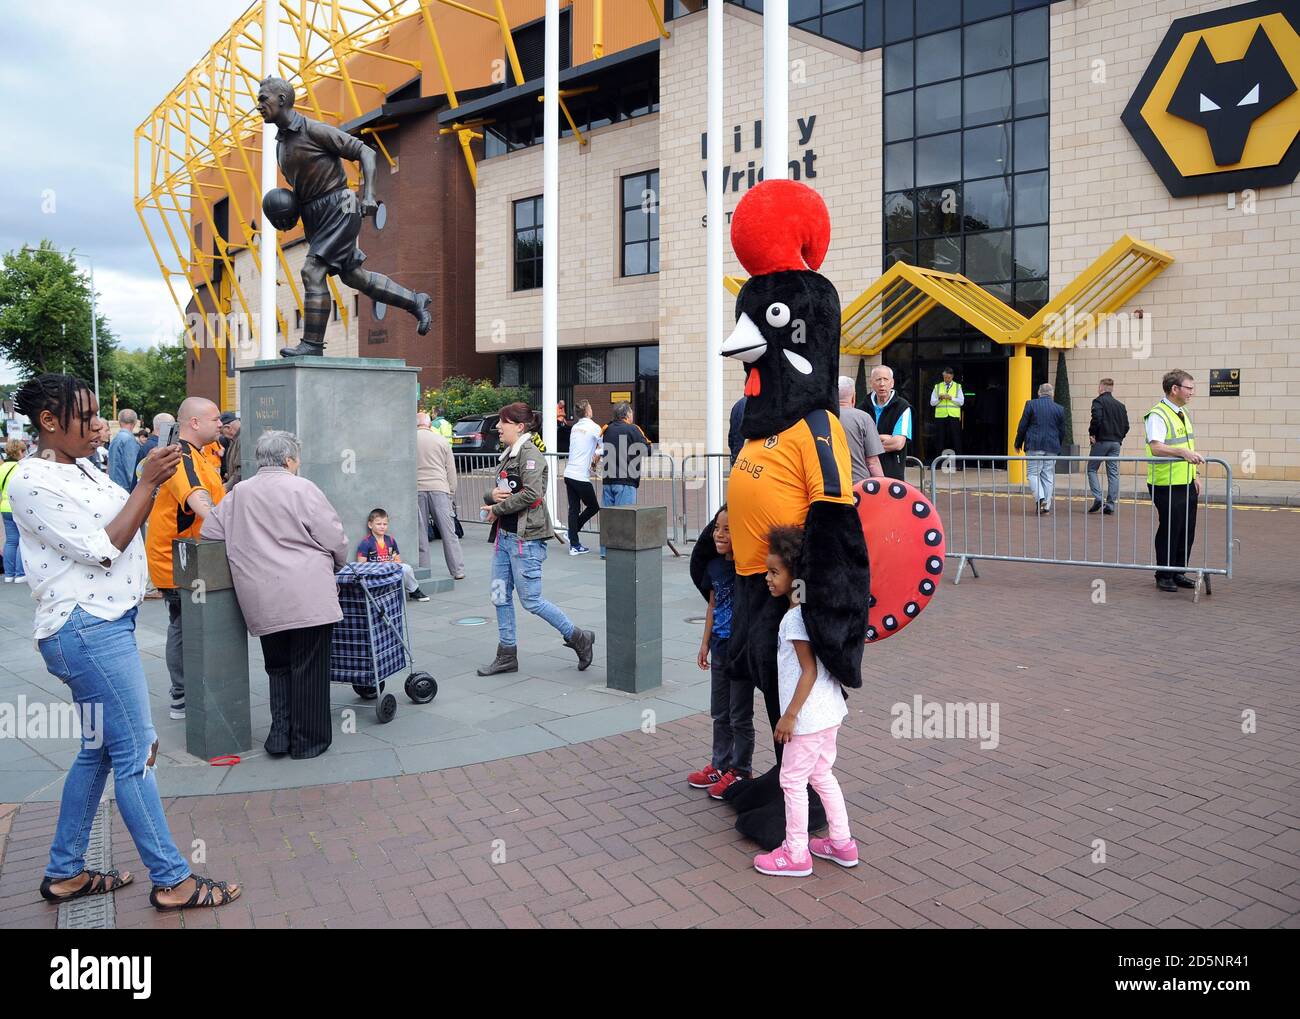 Fans pose for photos with Wolverhampton club mascot outside Molineux stadium before the Wolverhampton Wanderers and Reading match at the Molineux Stadium. Stock Photo